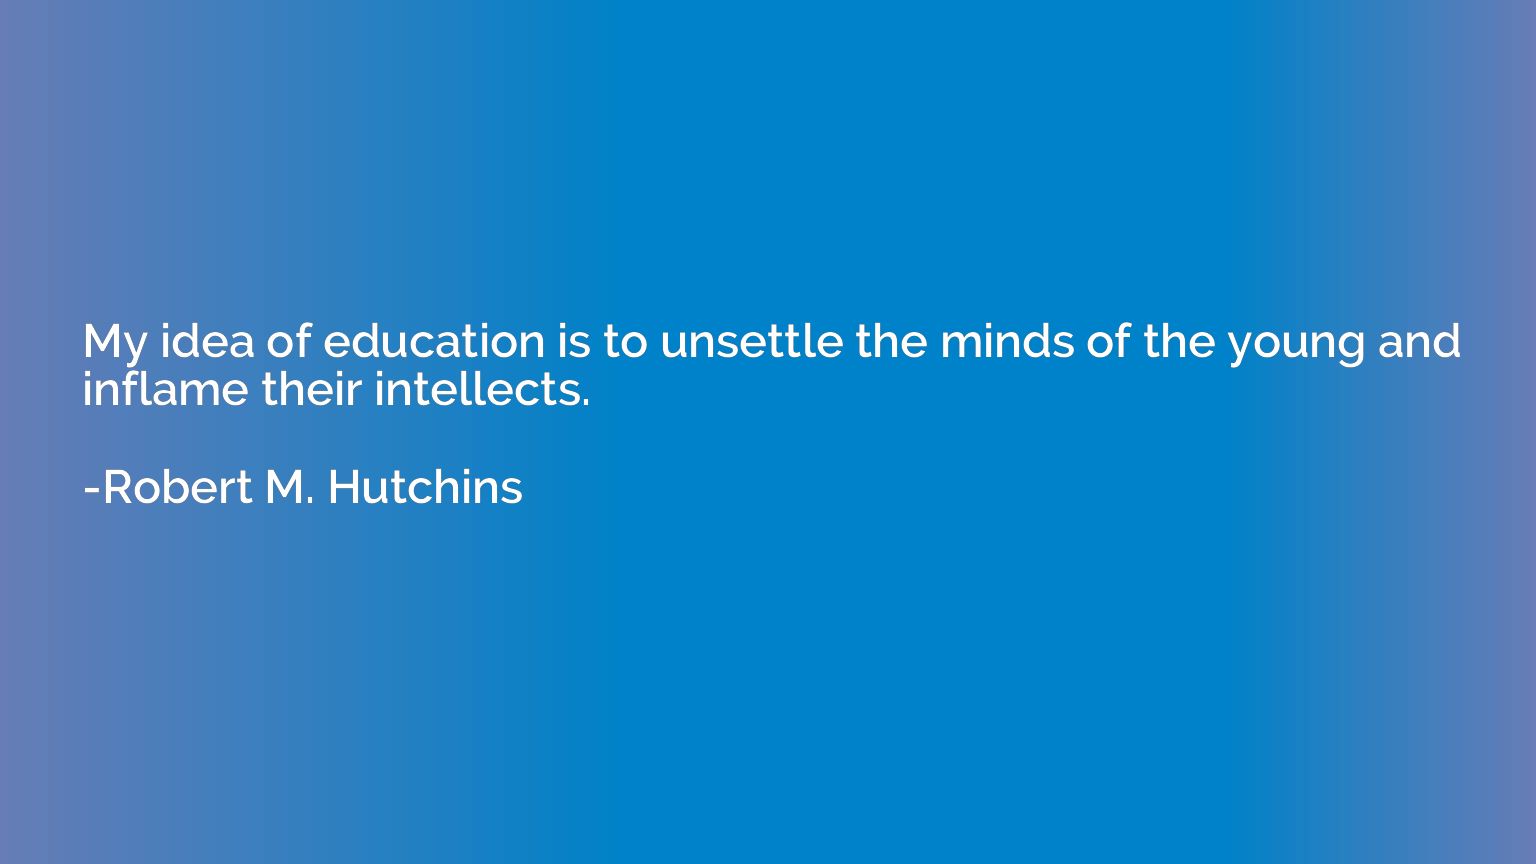 My idea of education is to unsettle the minds of the young a